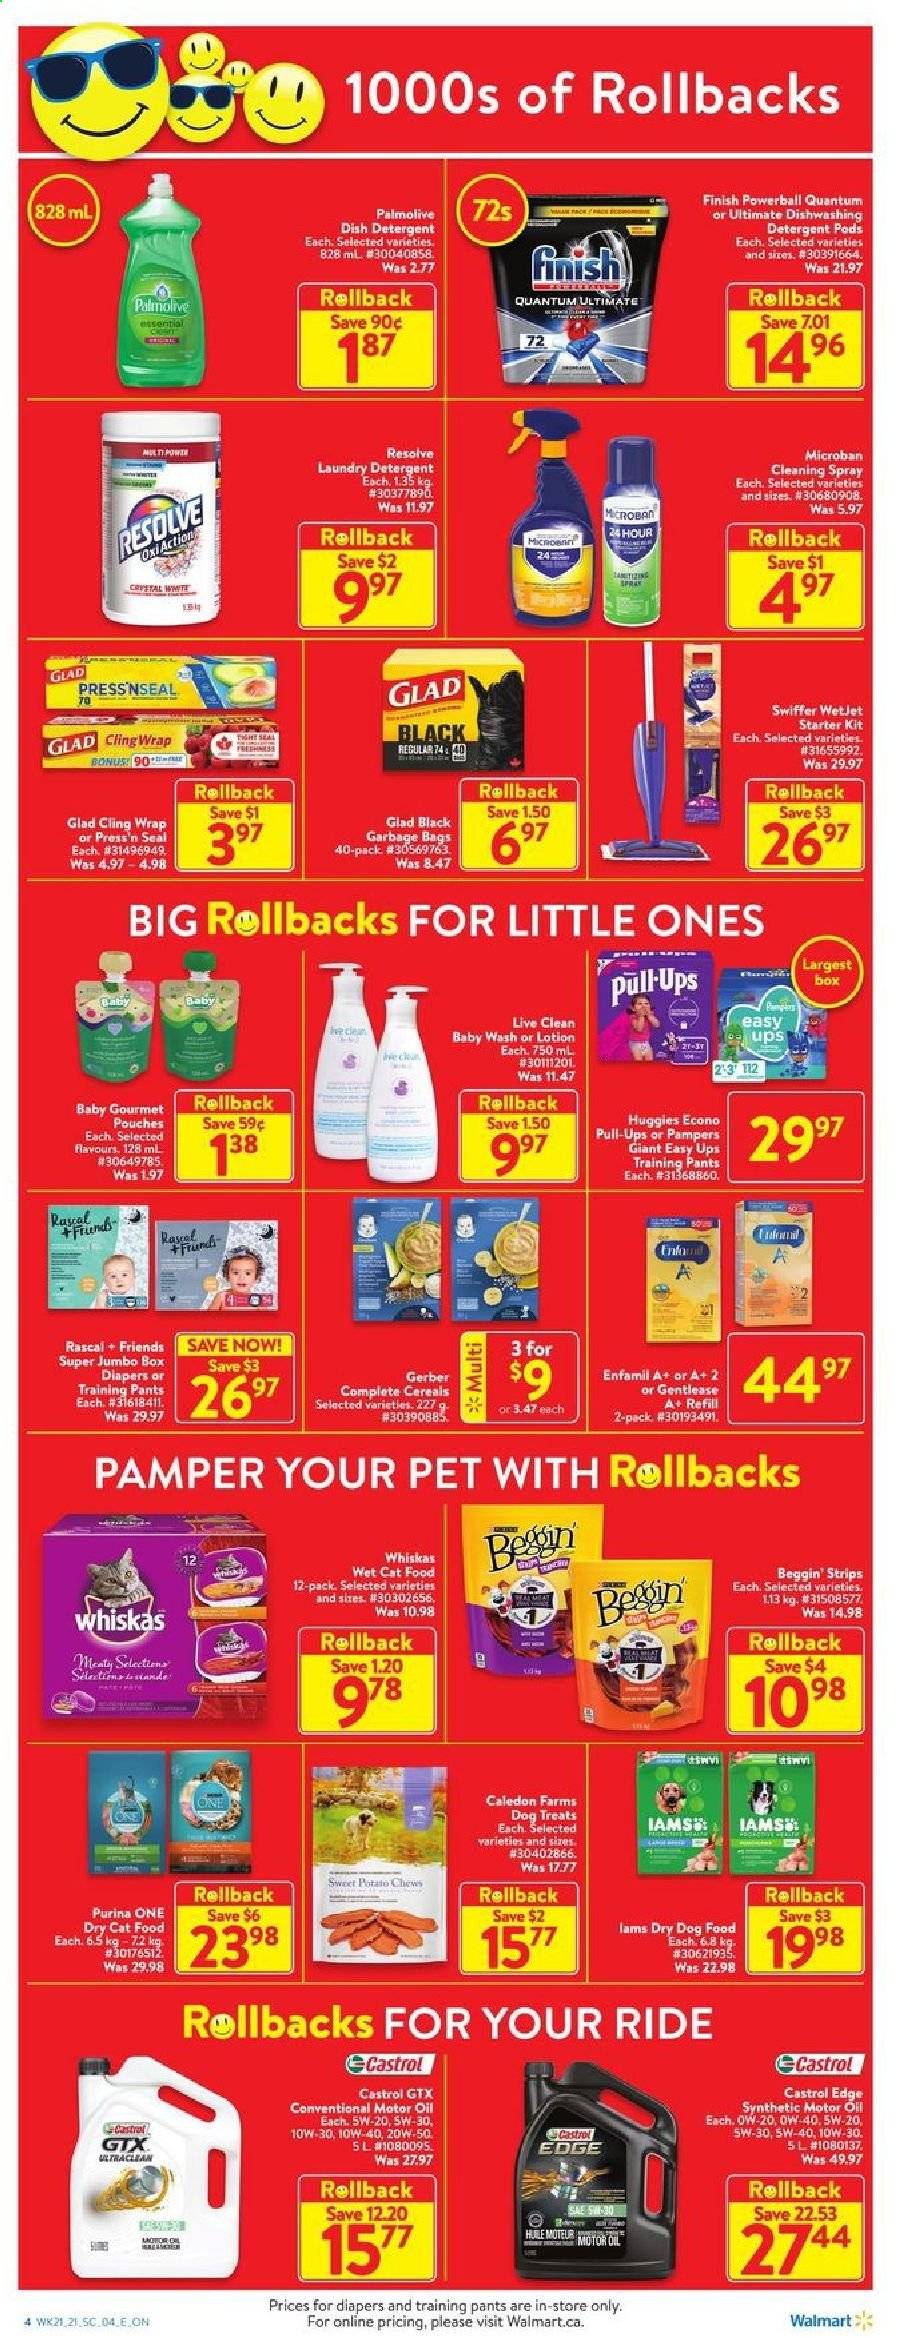 thumbnail - Walmart Flyer - June 17, 2021 - June 23, 2021 - Sales products - sweet potato, strips, chewing gum, Gerber, cereals, oil, Enfamil, pants, nappies, baby pants, Swiffer, laundry detergent, Finish Powerball, Palmolive, body lotion, bag, WetJet, clingwrap, animal food, cat food, dog food, Purina, dry dog food, dry cat food, Beggin', Iams, wet cat food, motor oil, Castrol, Huggies, Pampers. Page 4.